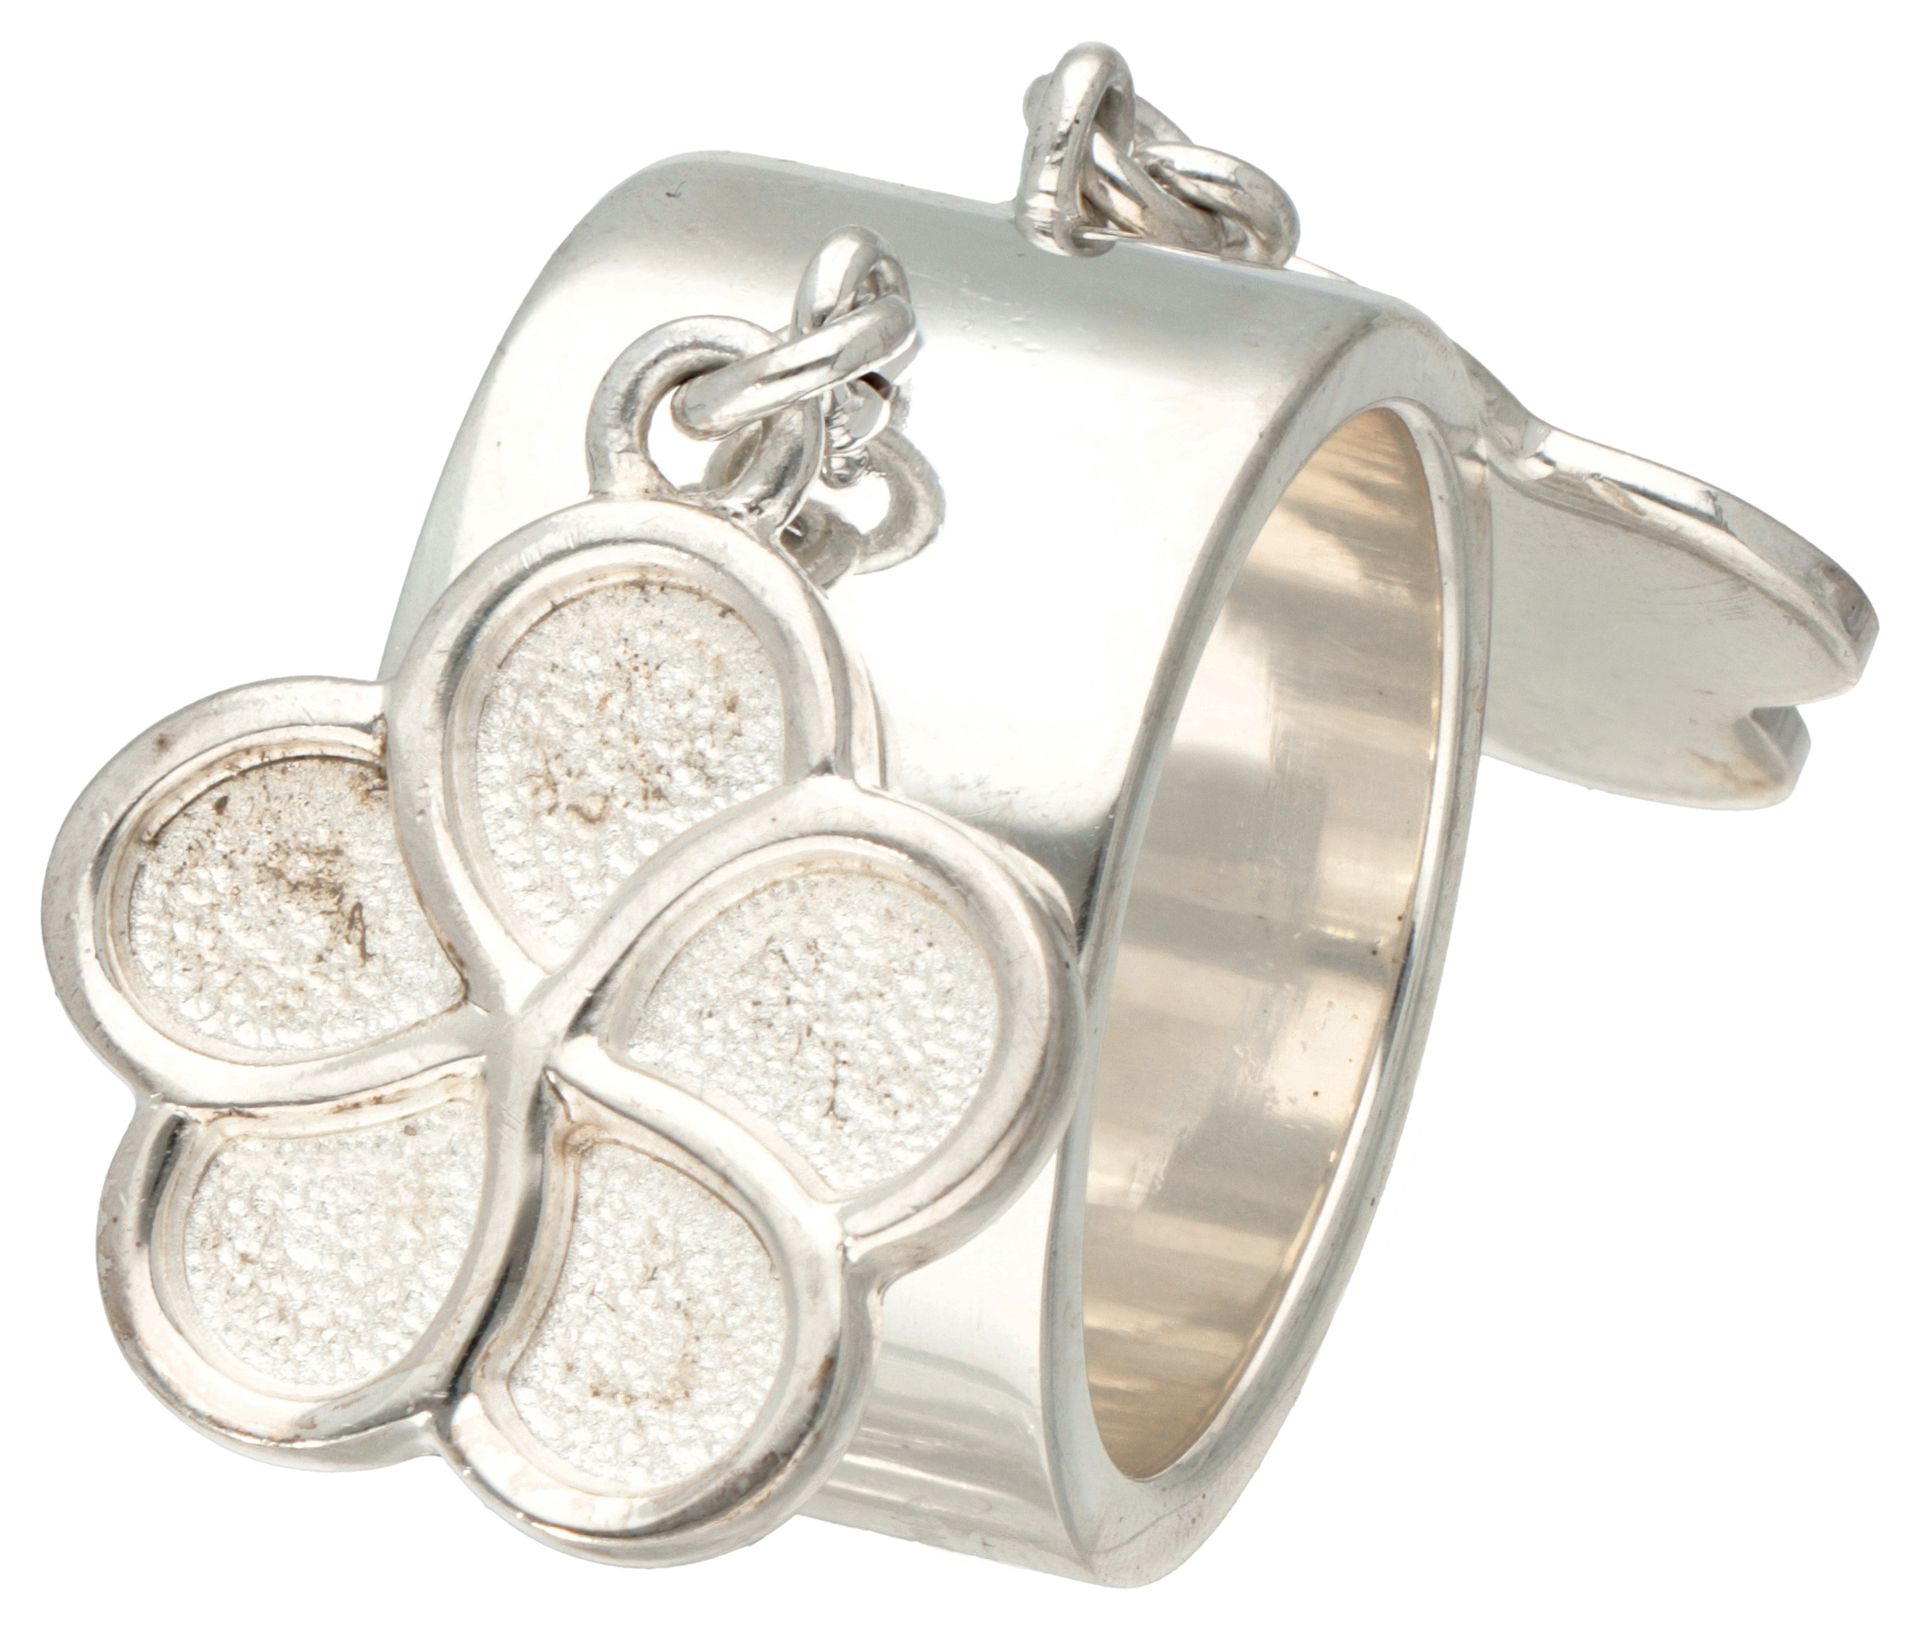 Sterling silver Christofle band ring with two flower-shaped charms. Hallmarks: C&hellip;